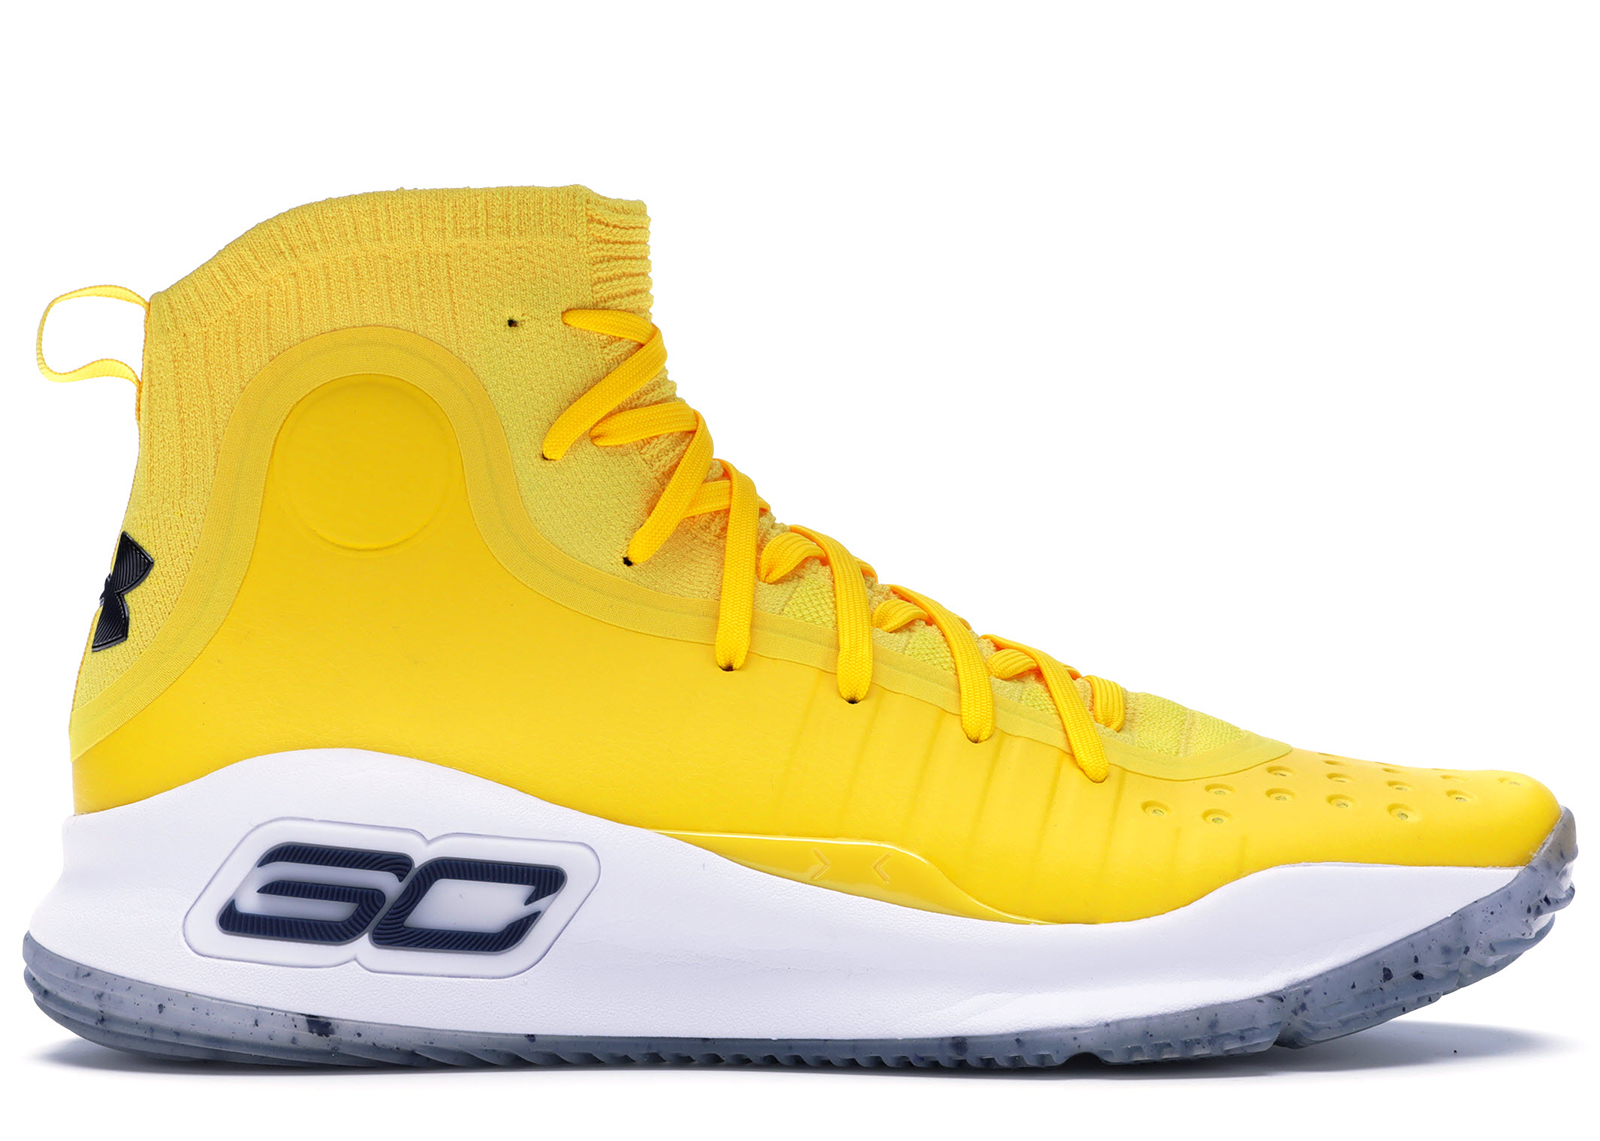 curry 4 size 12